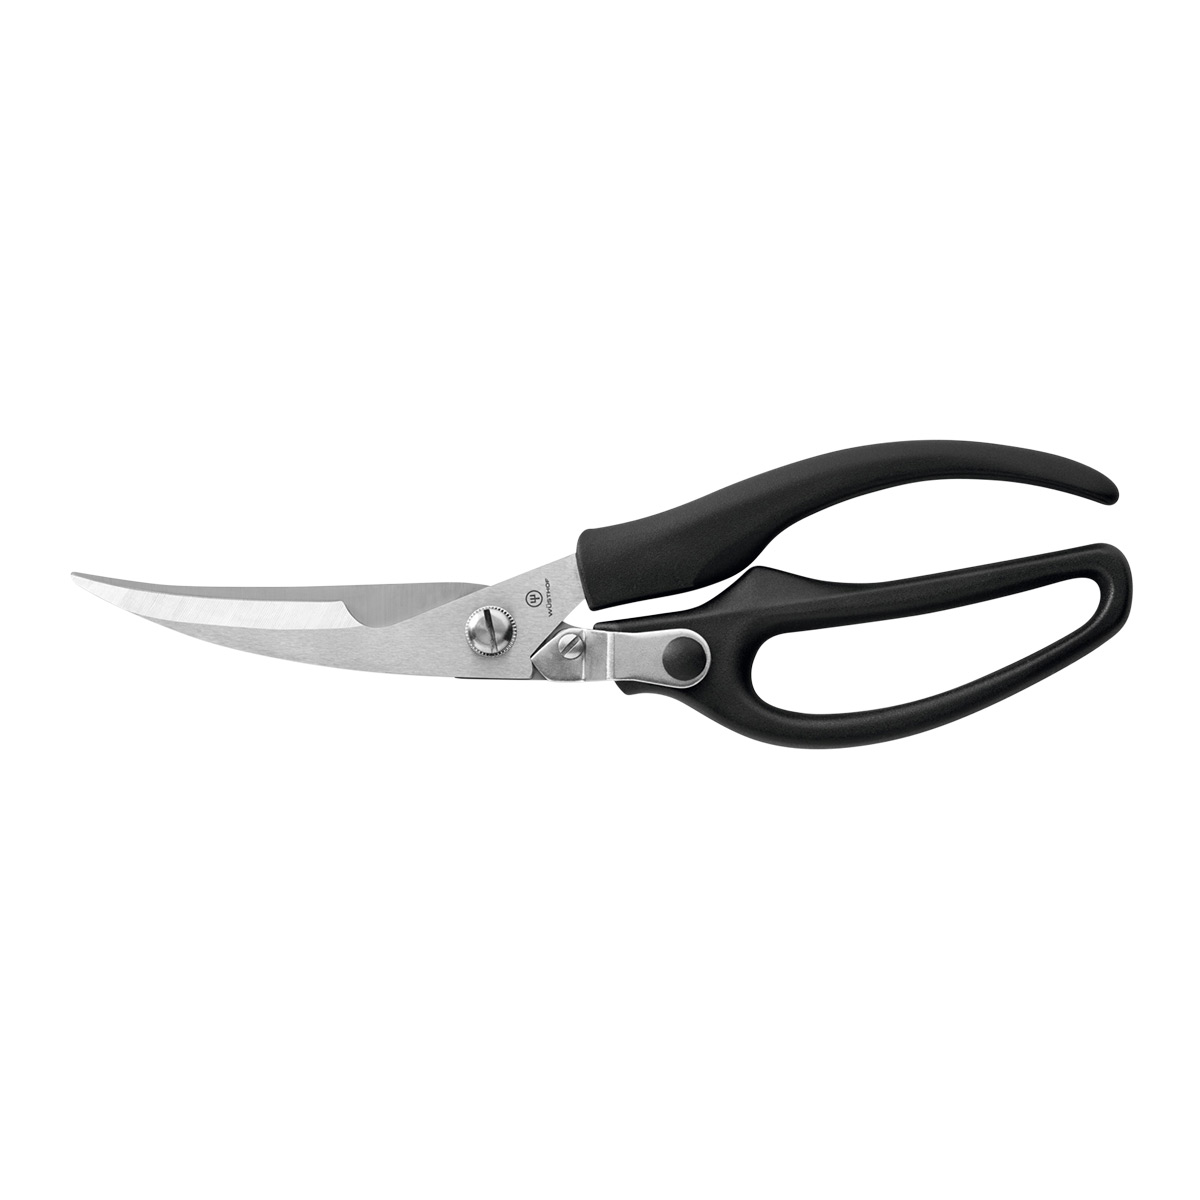 https://www.containerstore.com/catalogimages/523207/10099342-1069595005---SHEARS---10in-.jpg